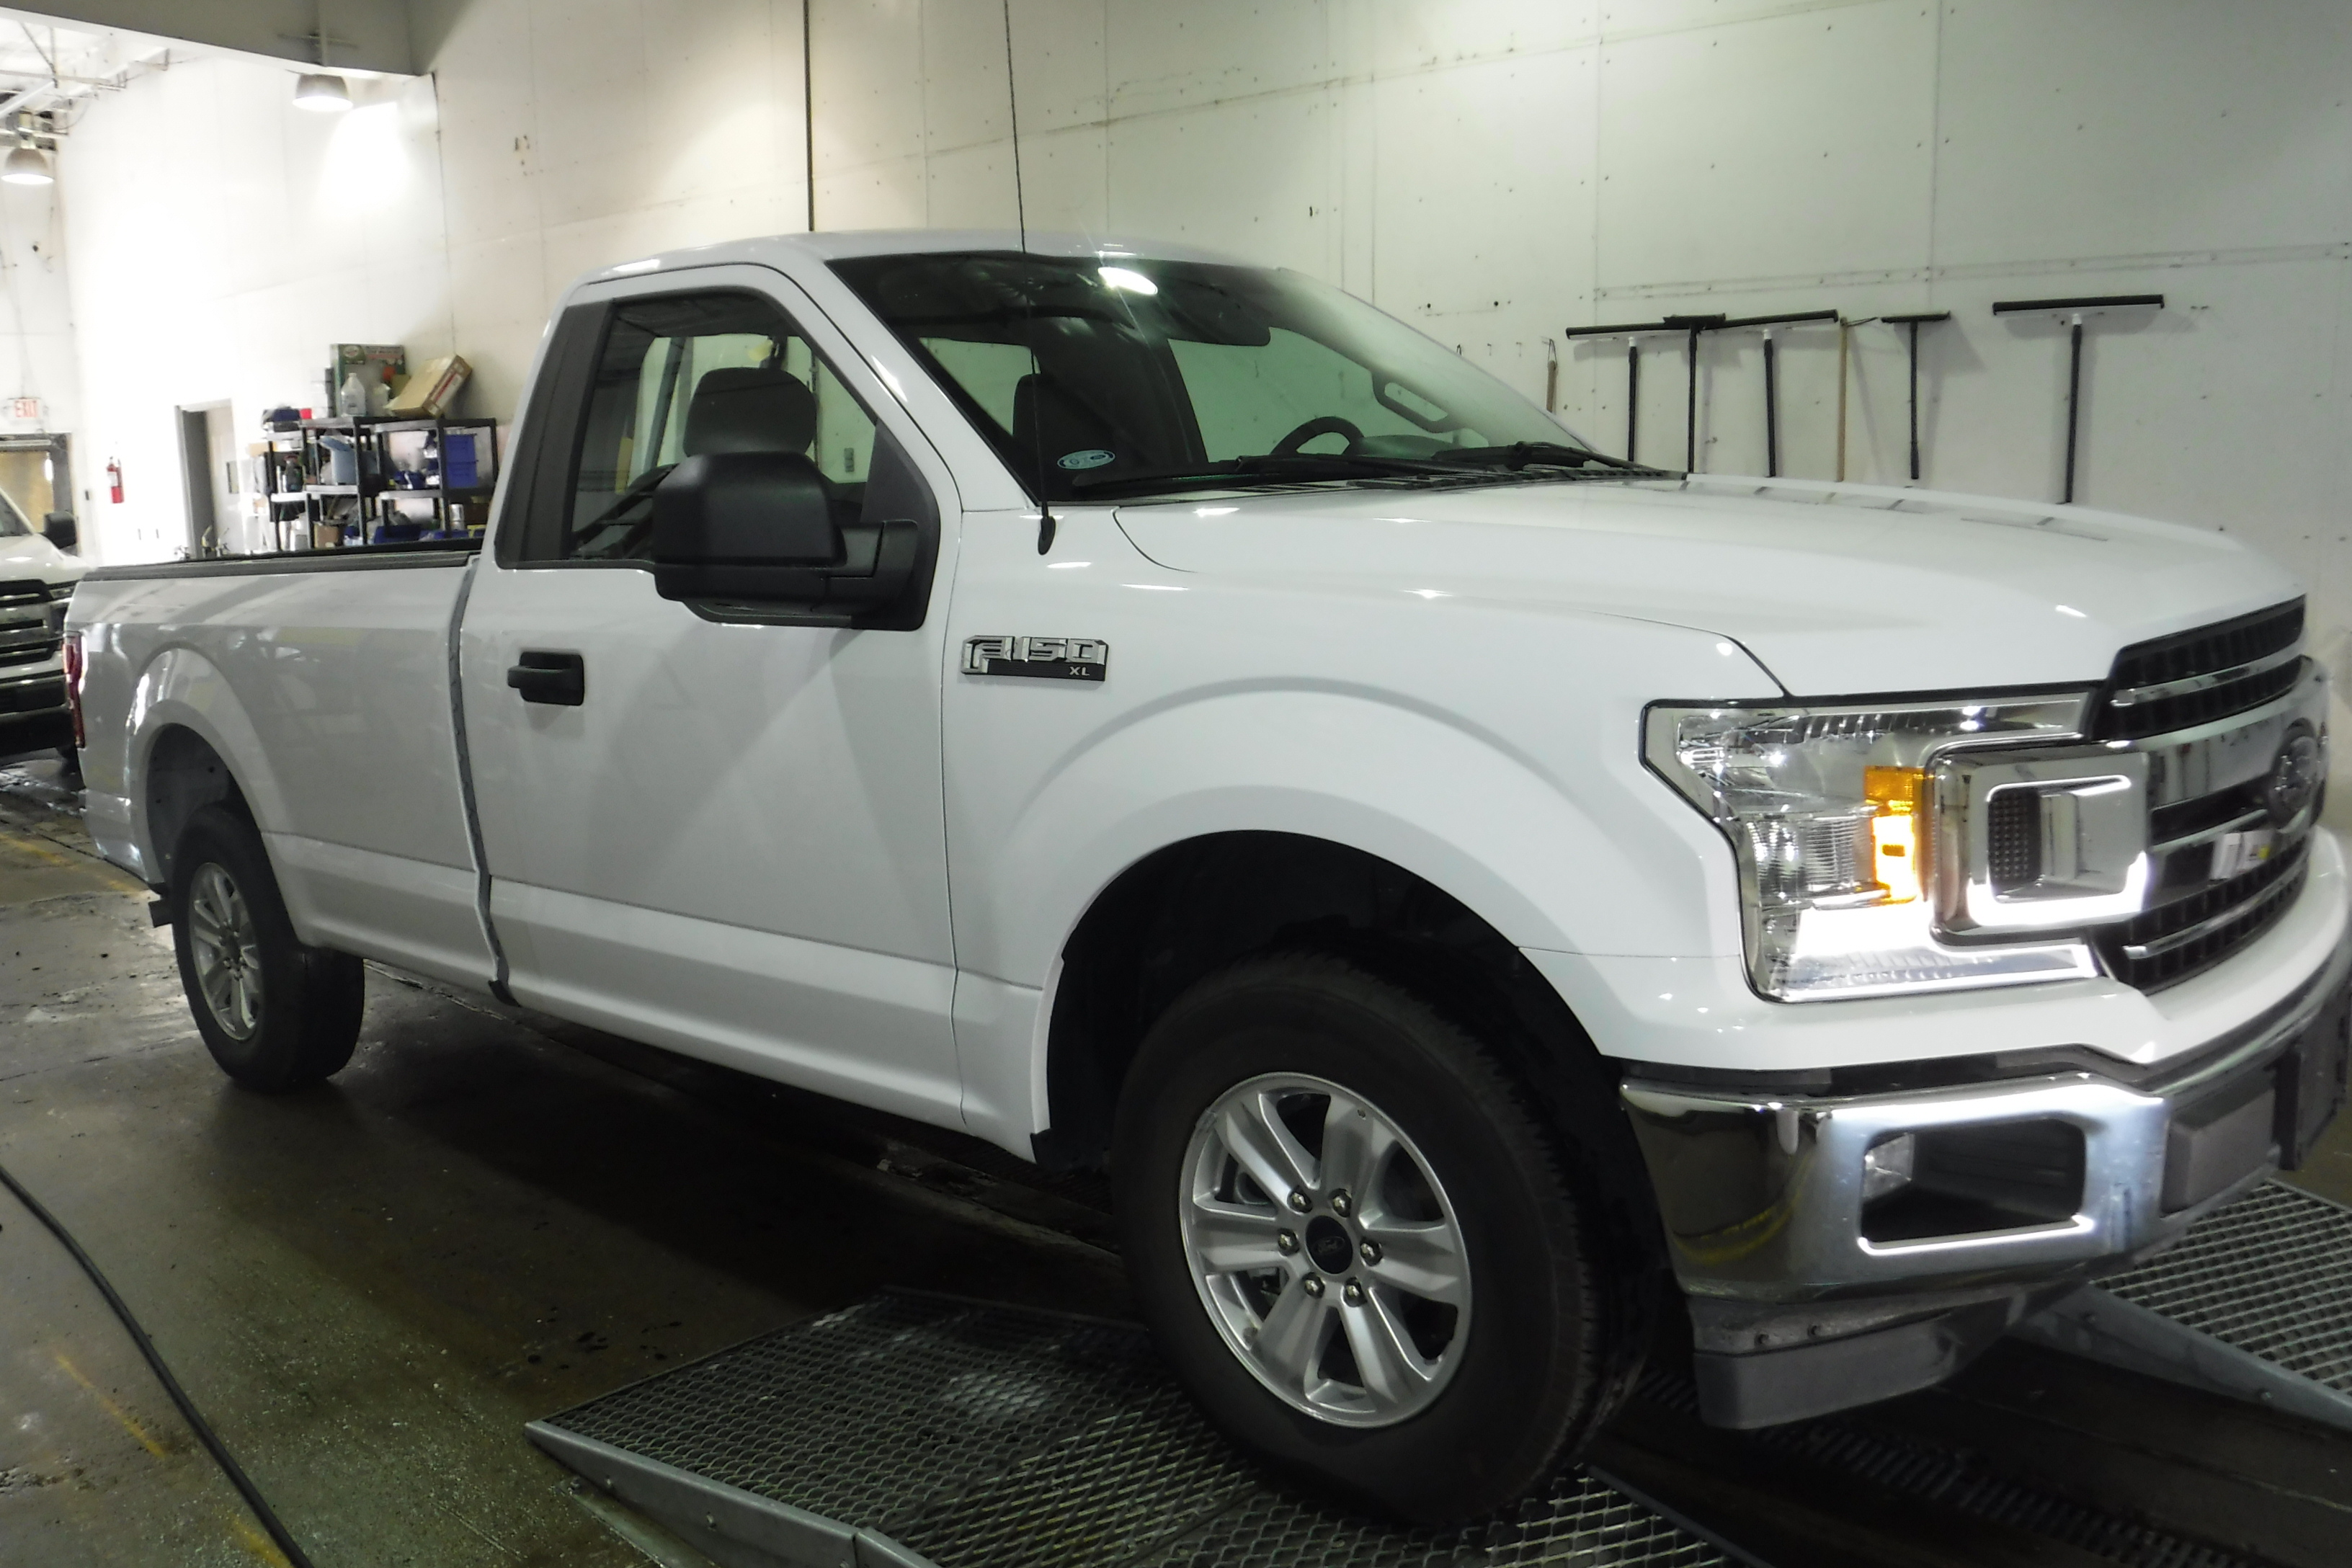 2019 Ford F-150 for Sale in Denver, CO 80229 | U-Haul